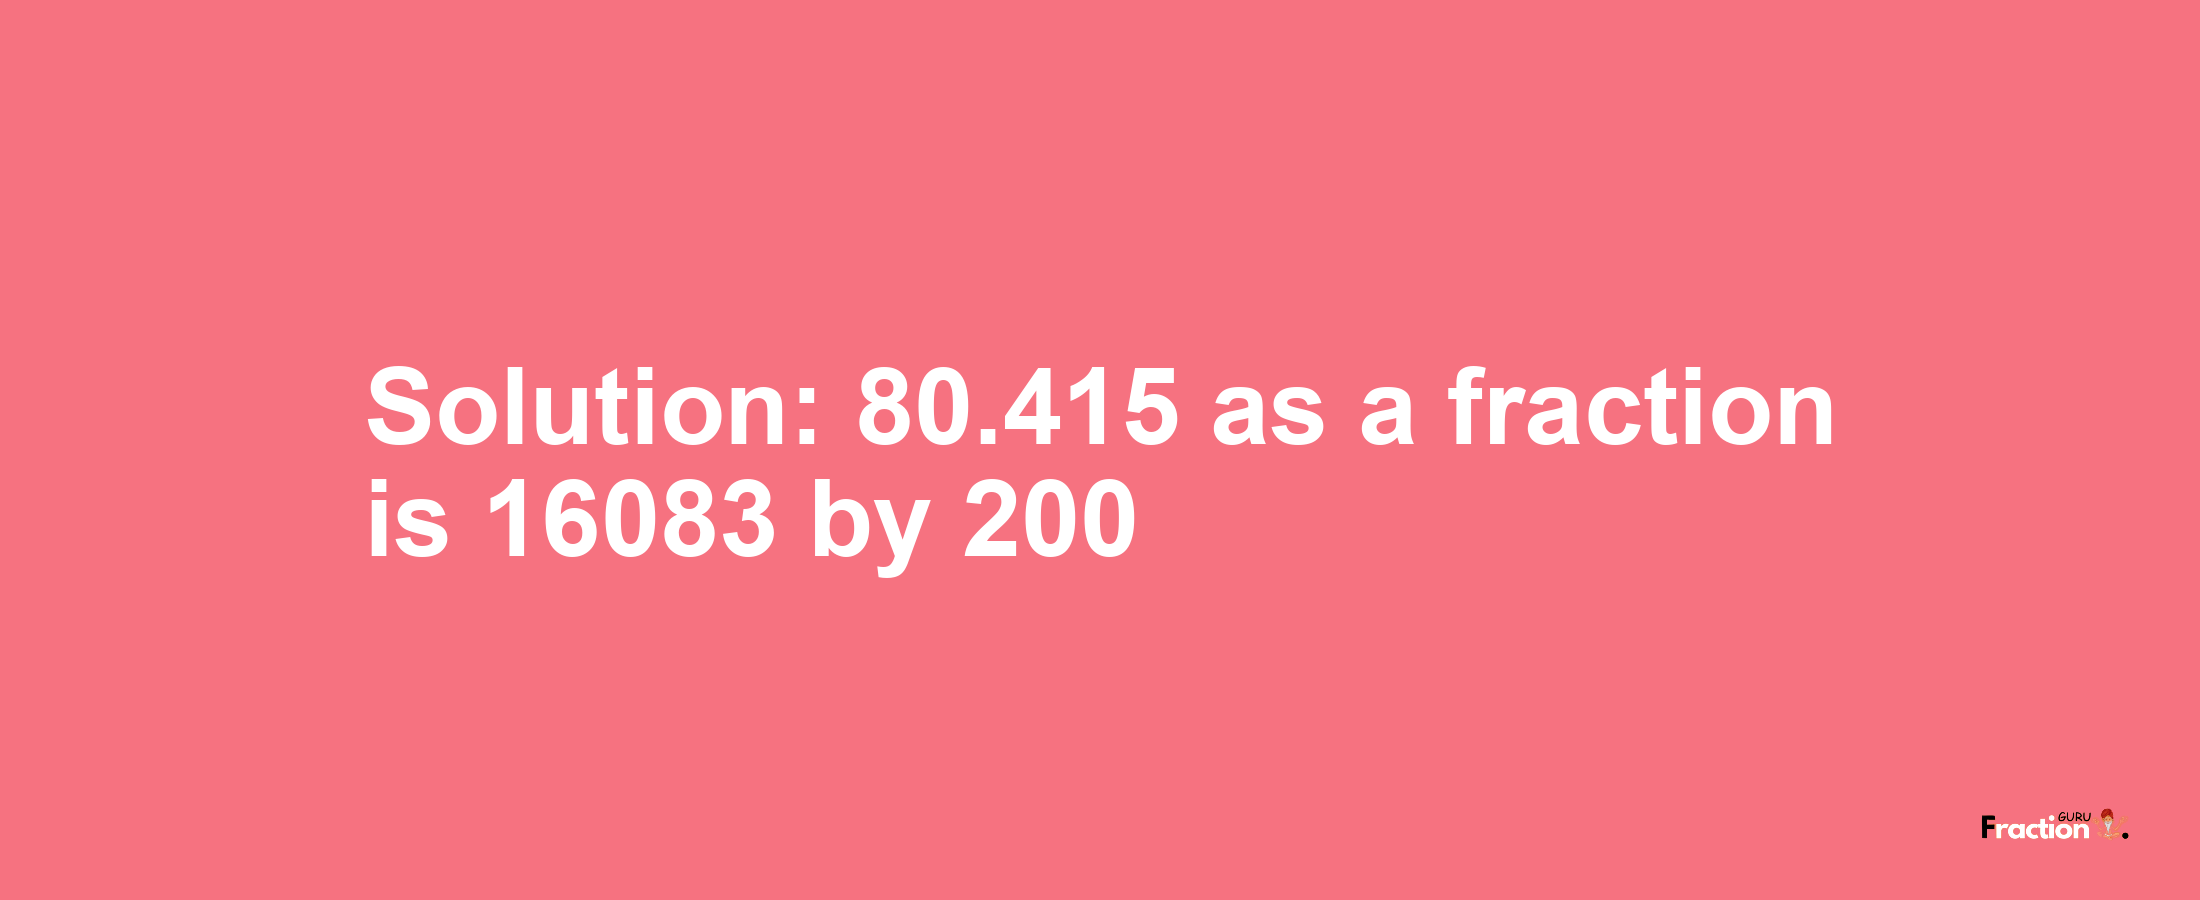 Solution:80.415 as a fraction is 16083/200